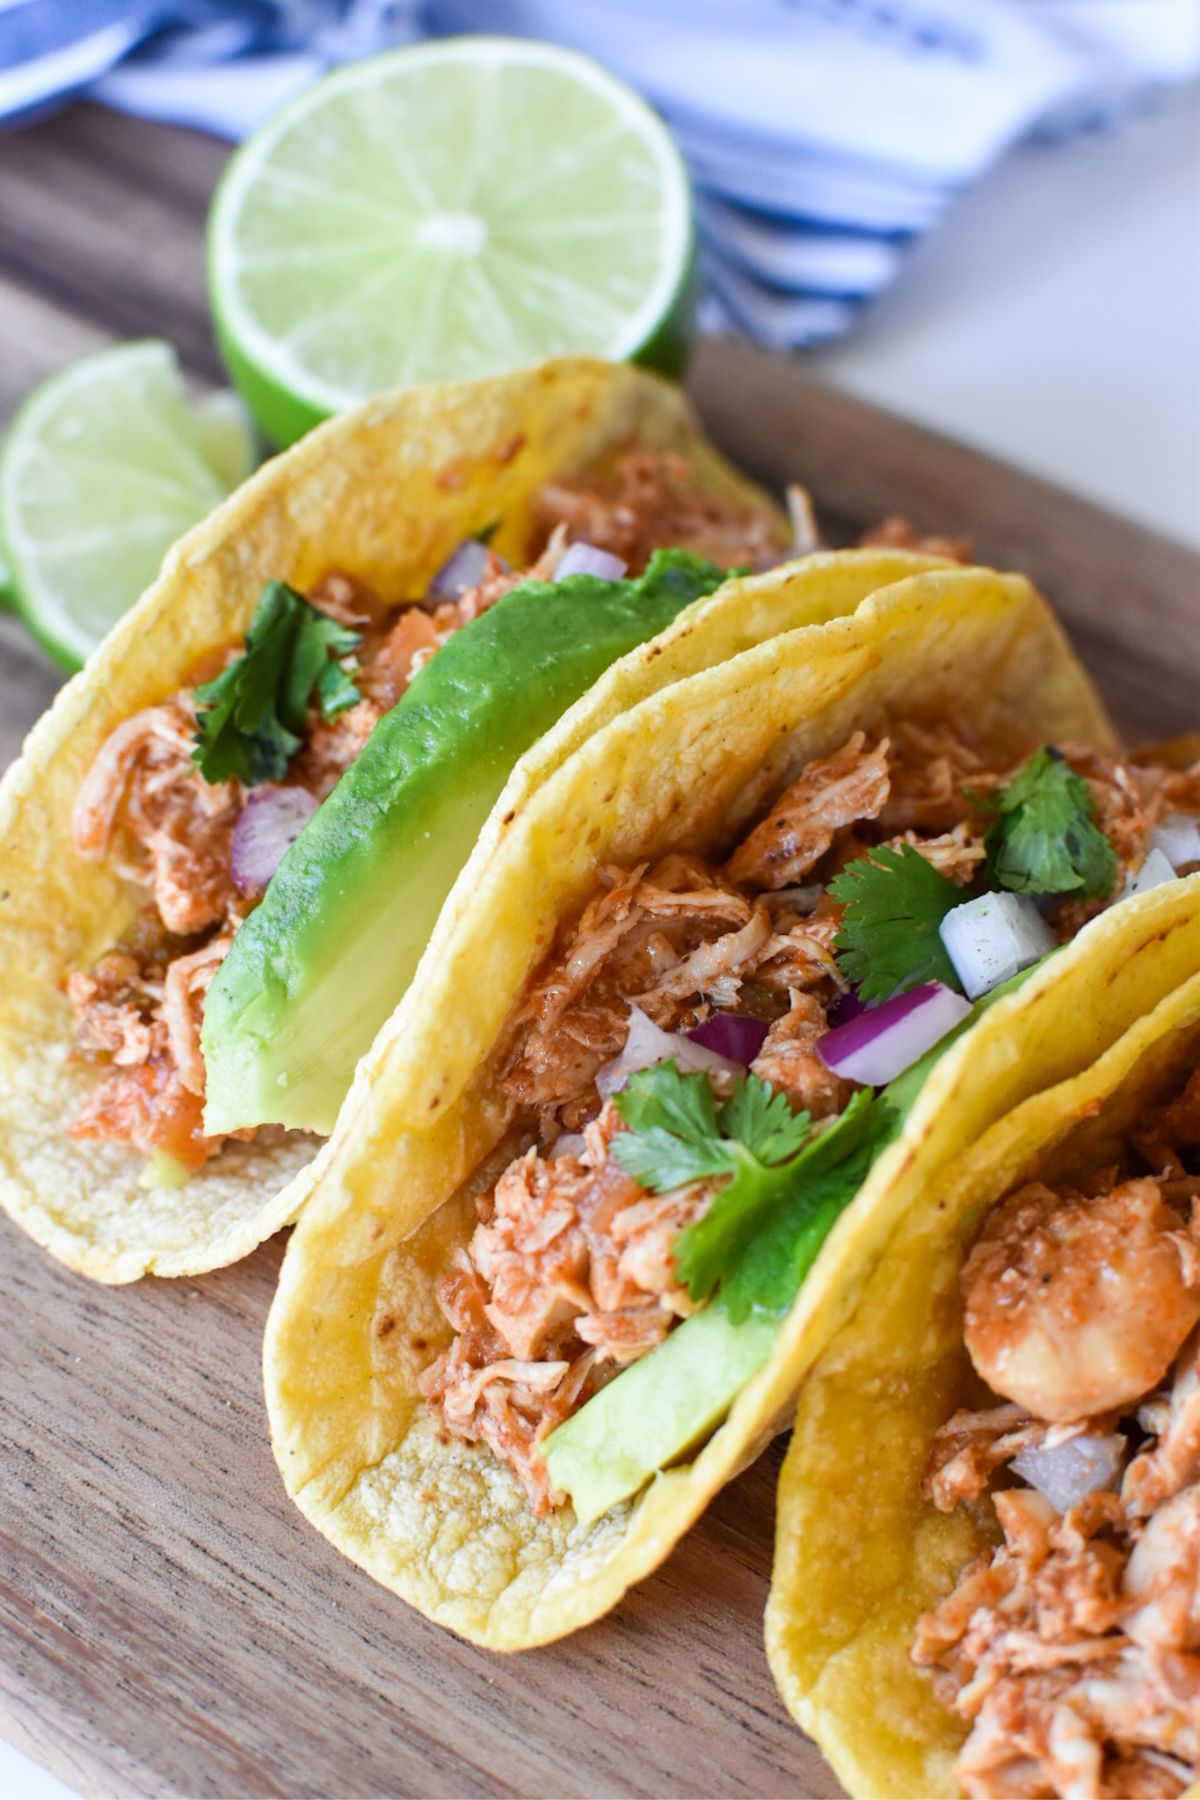 Chicken tacos on a wood board with a cut lime next to them.